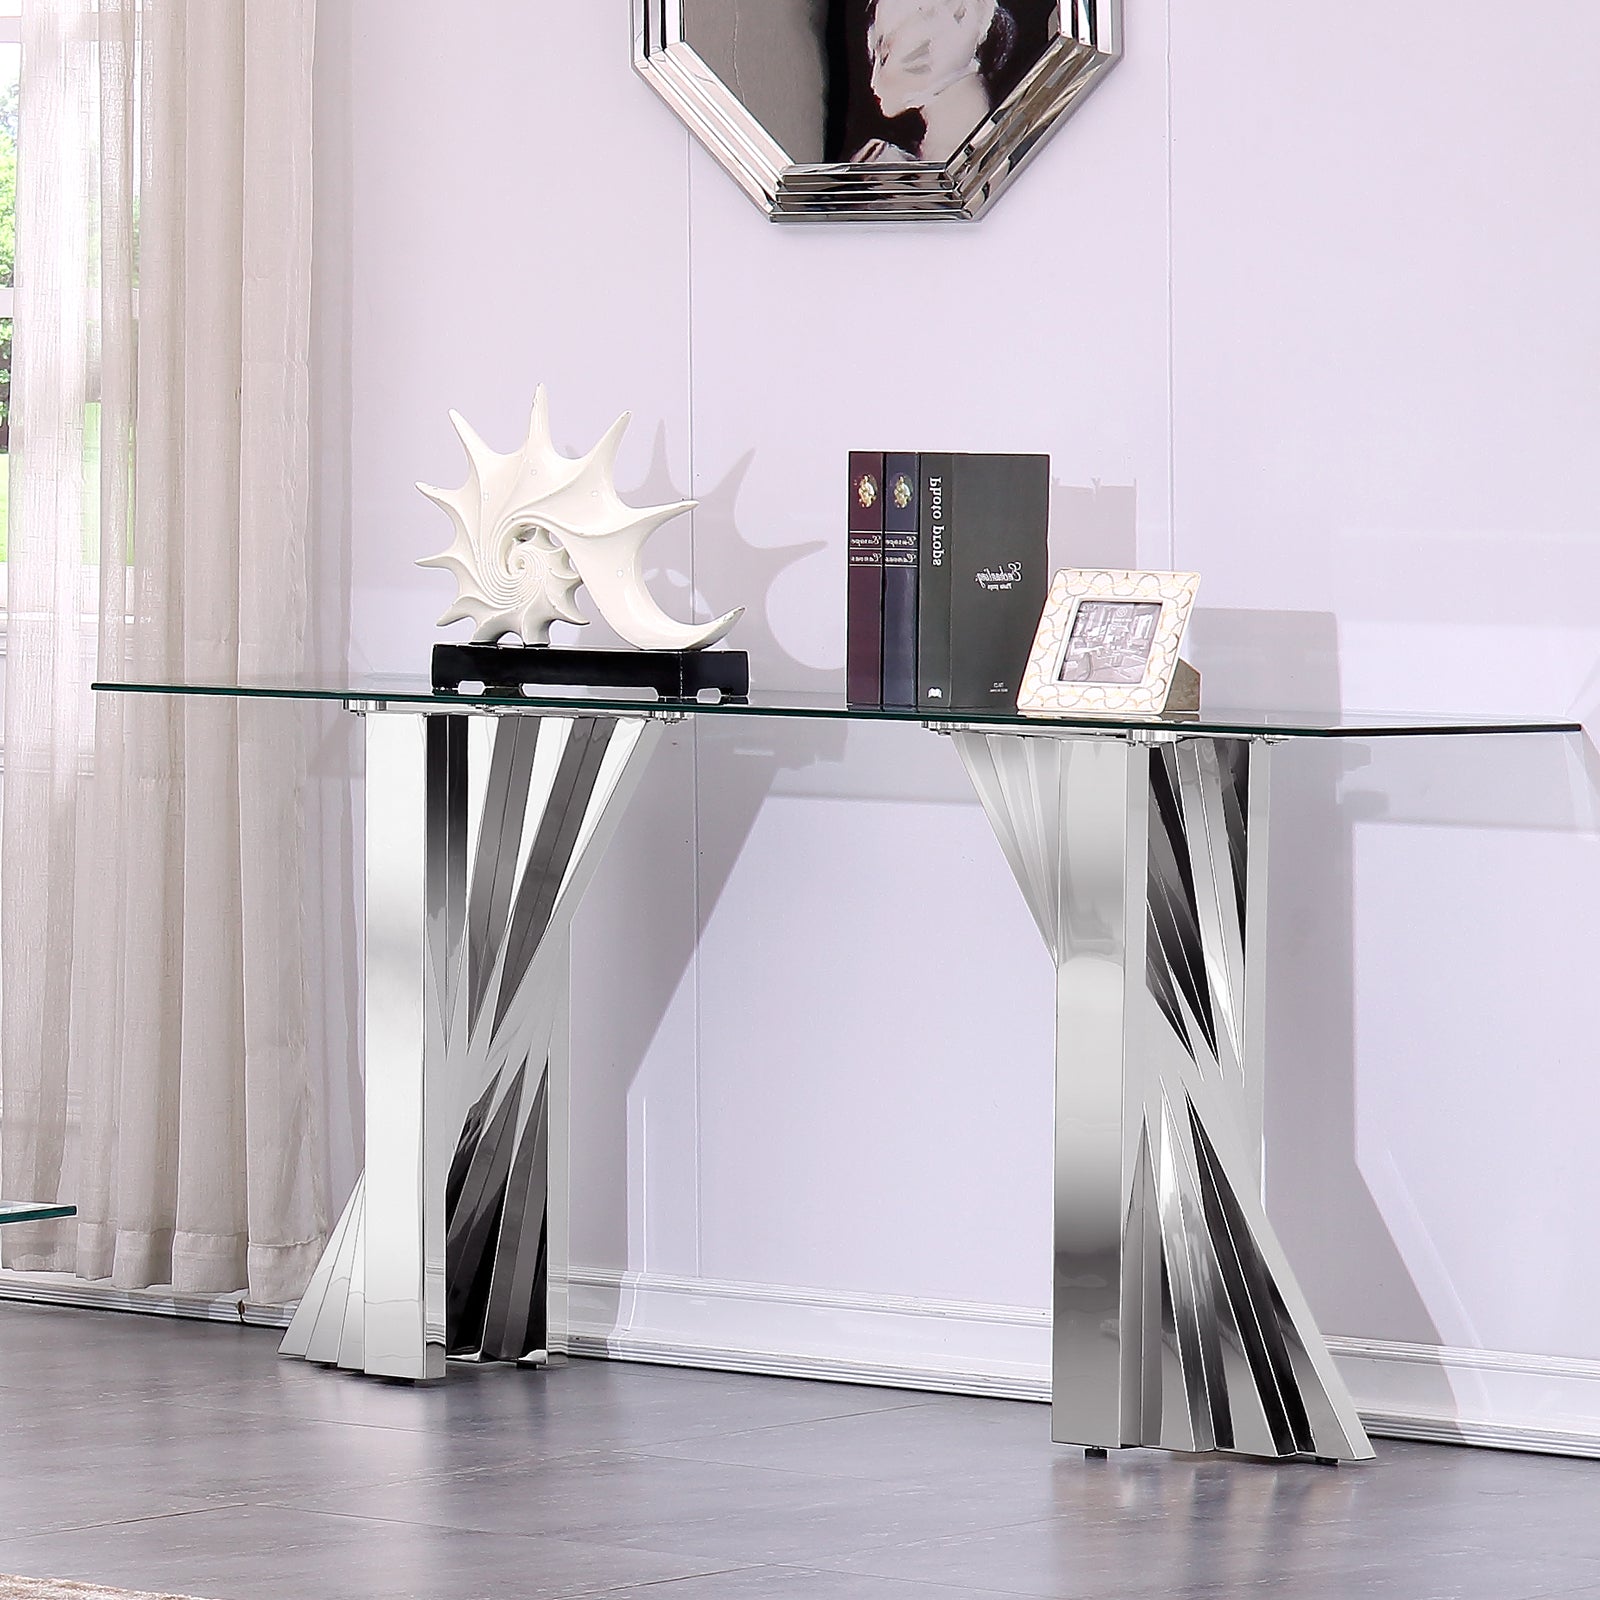 Elevate Your Space with the Sleek and Sophisticated AUZ Silver Console Table